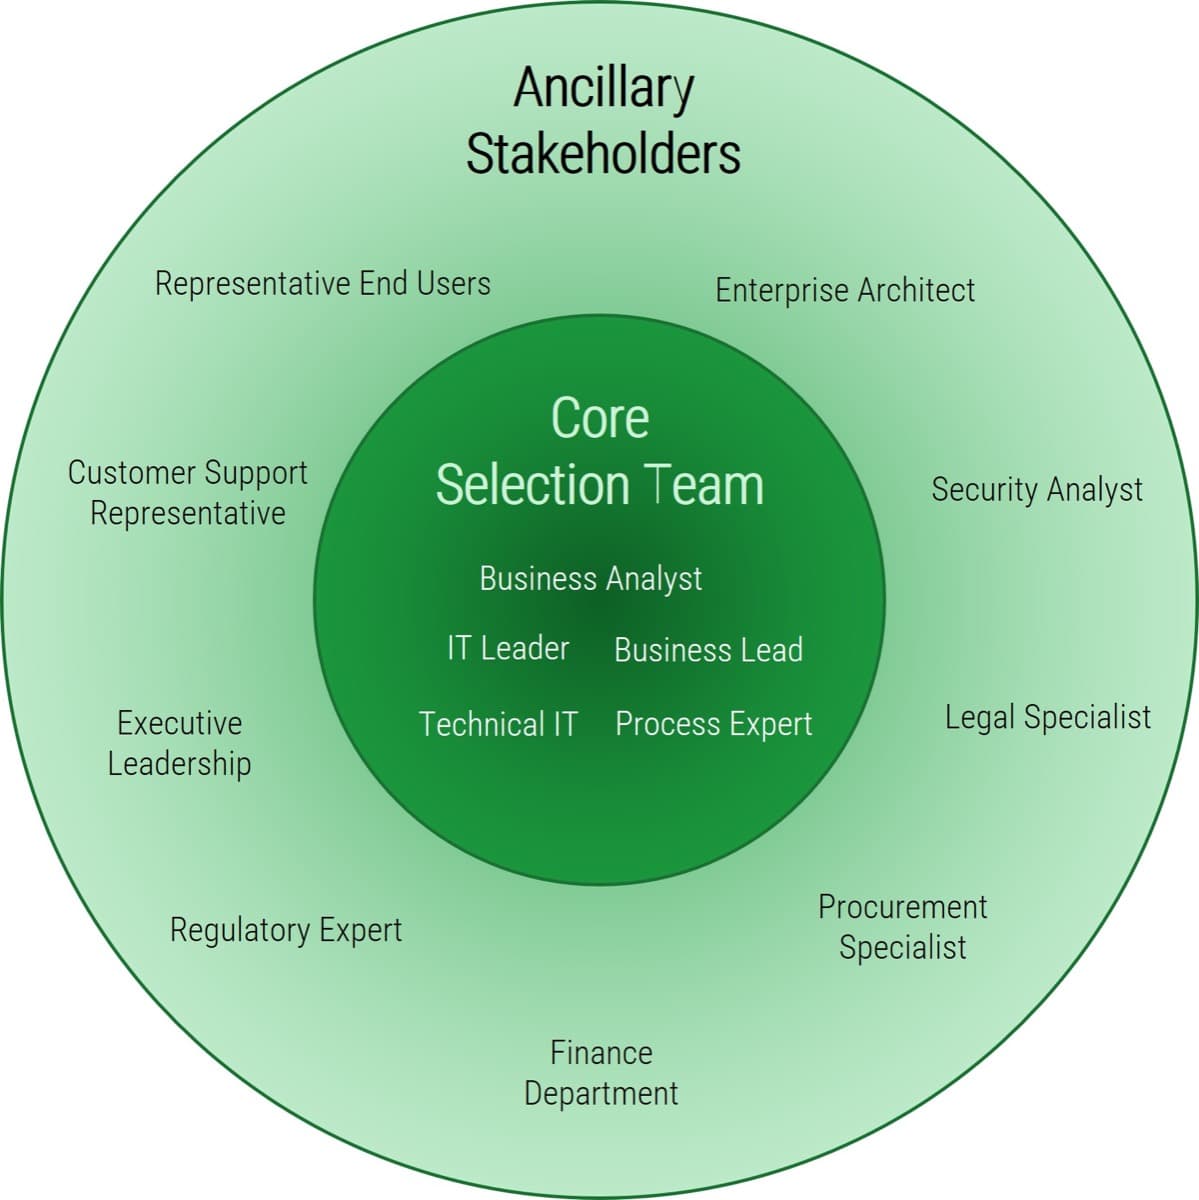 The image contains an outer circle that lists Ancillary Stakeholders, and an inner selection team that lists core selection teams.